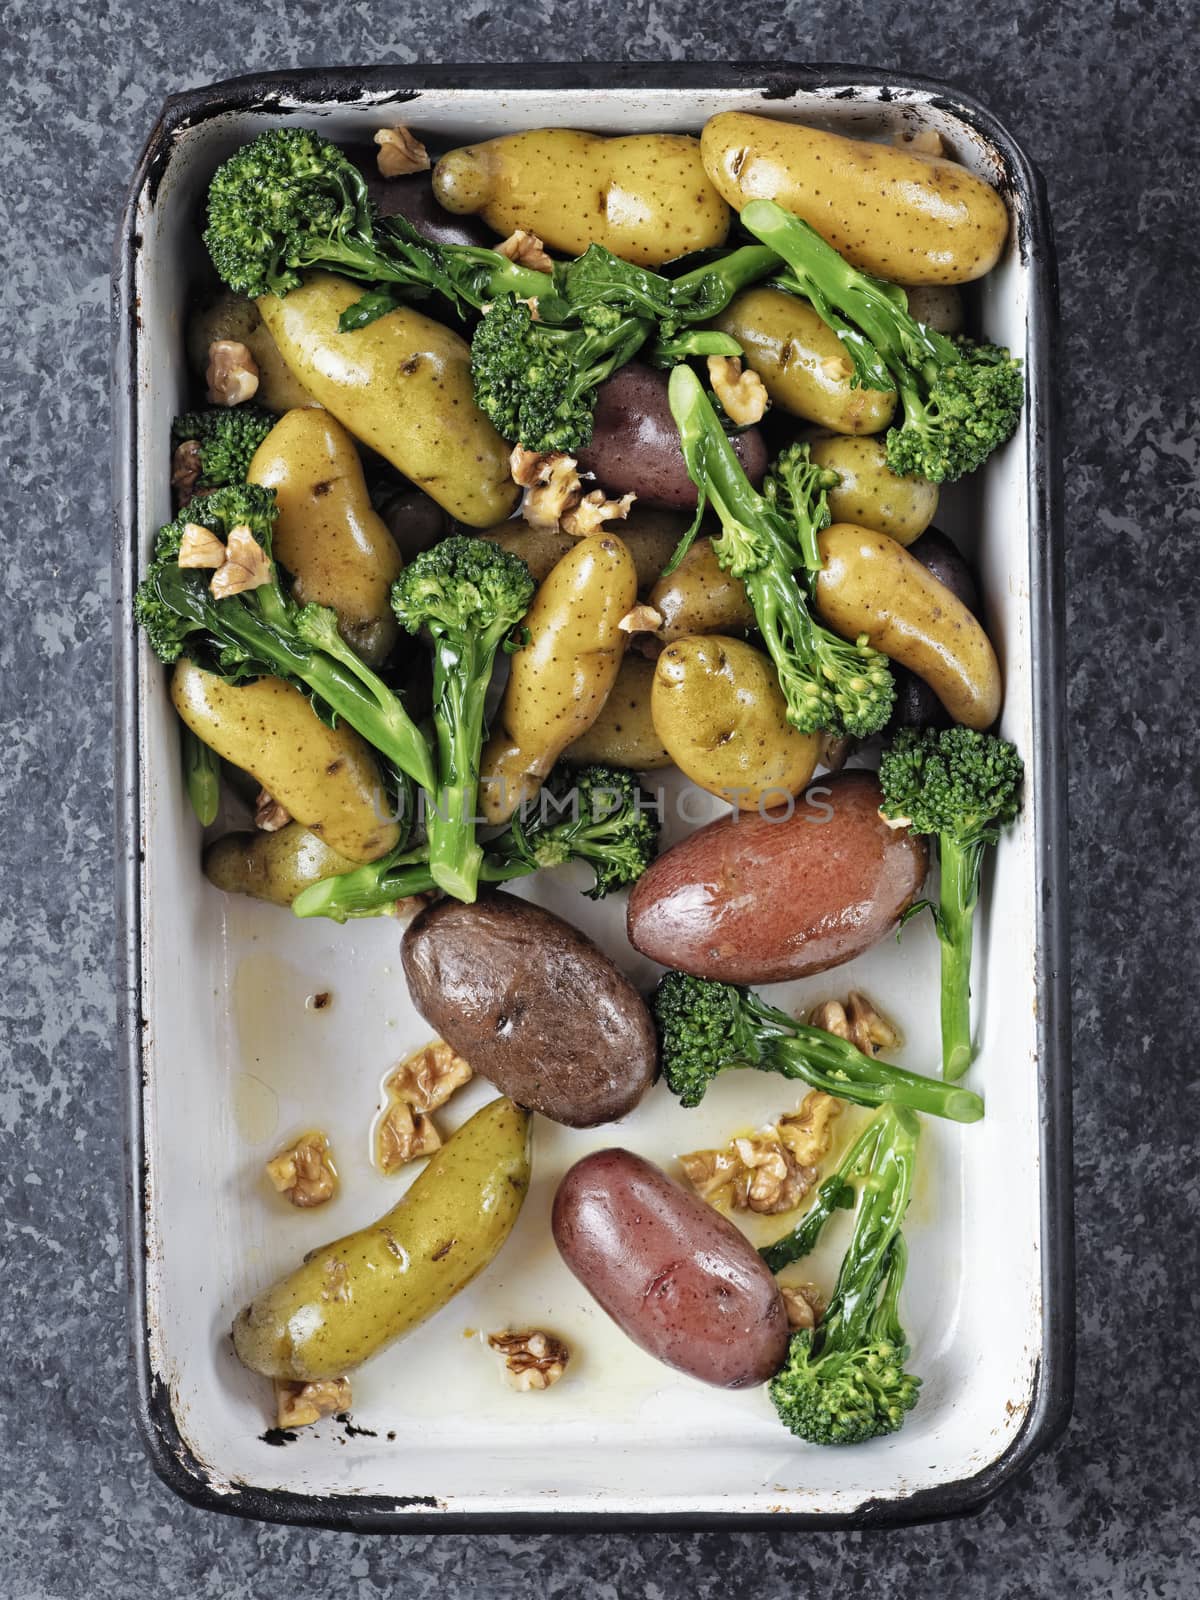 tray of potato broccolini salad by zkruger